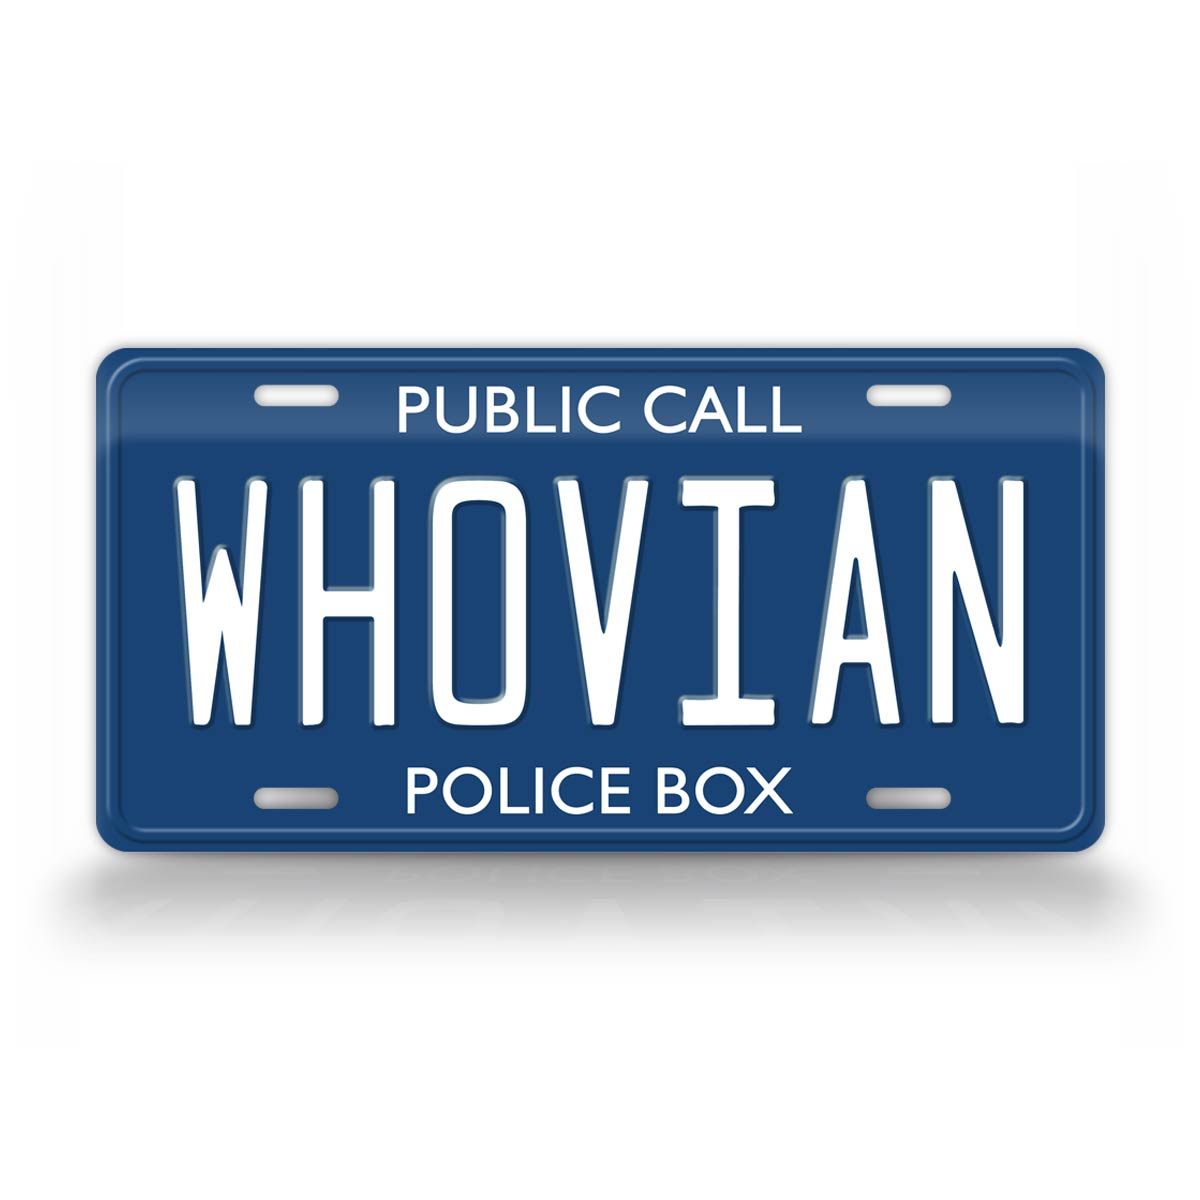 Doctor Who Whovian License Plate